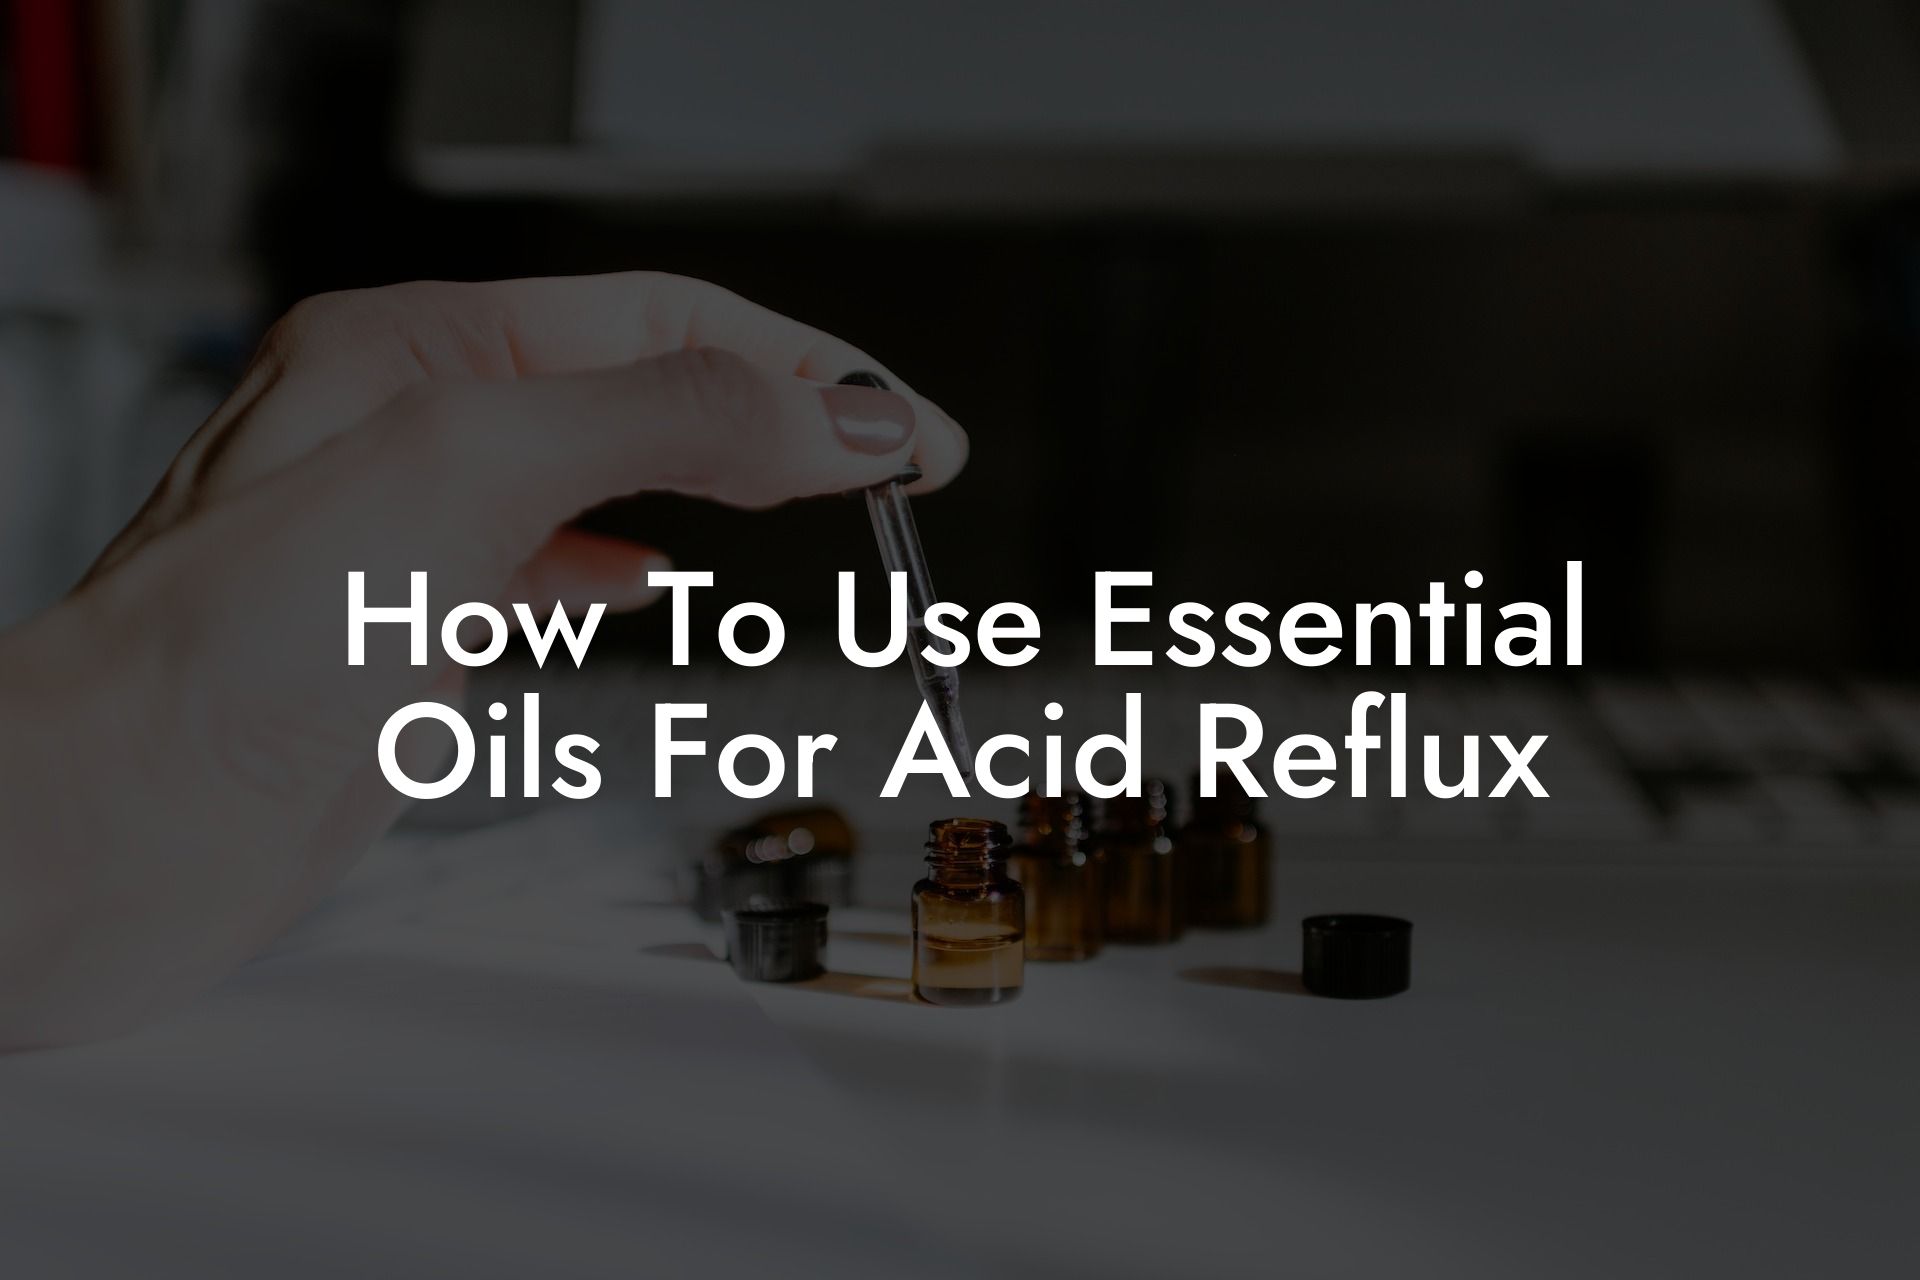 How To Use Essential Oils For Acid Reflux